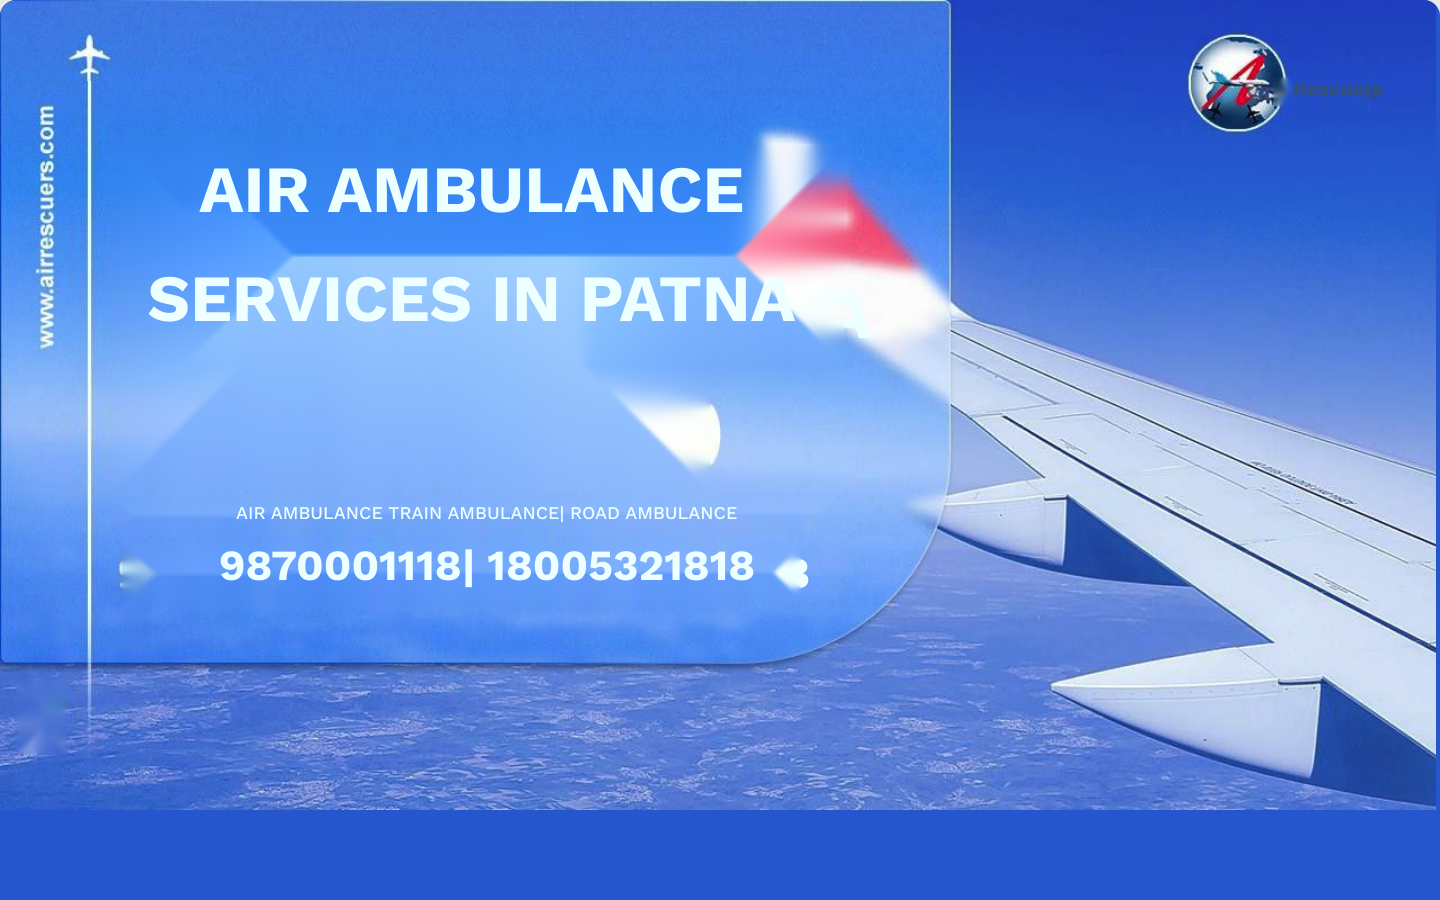 Air Ambulance Services in Patna